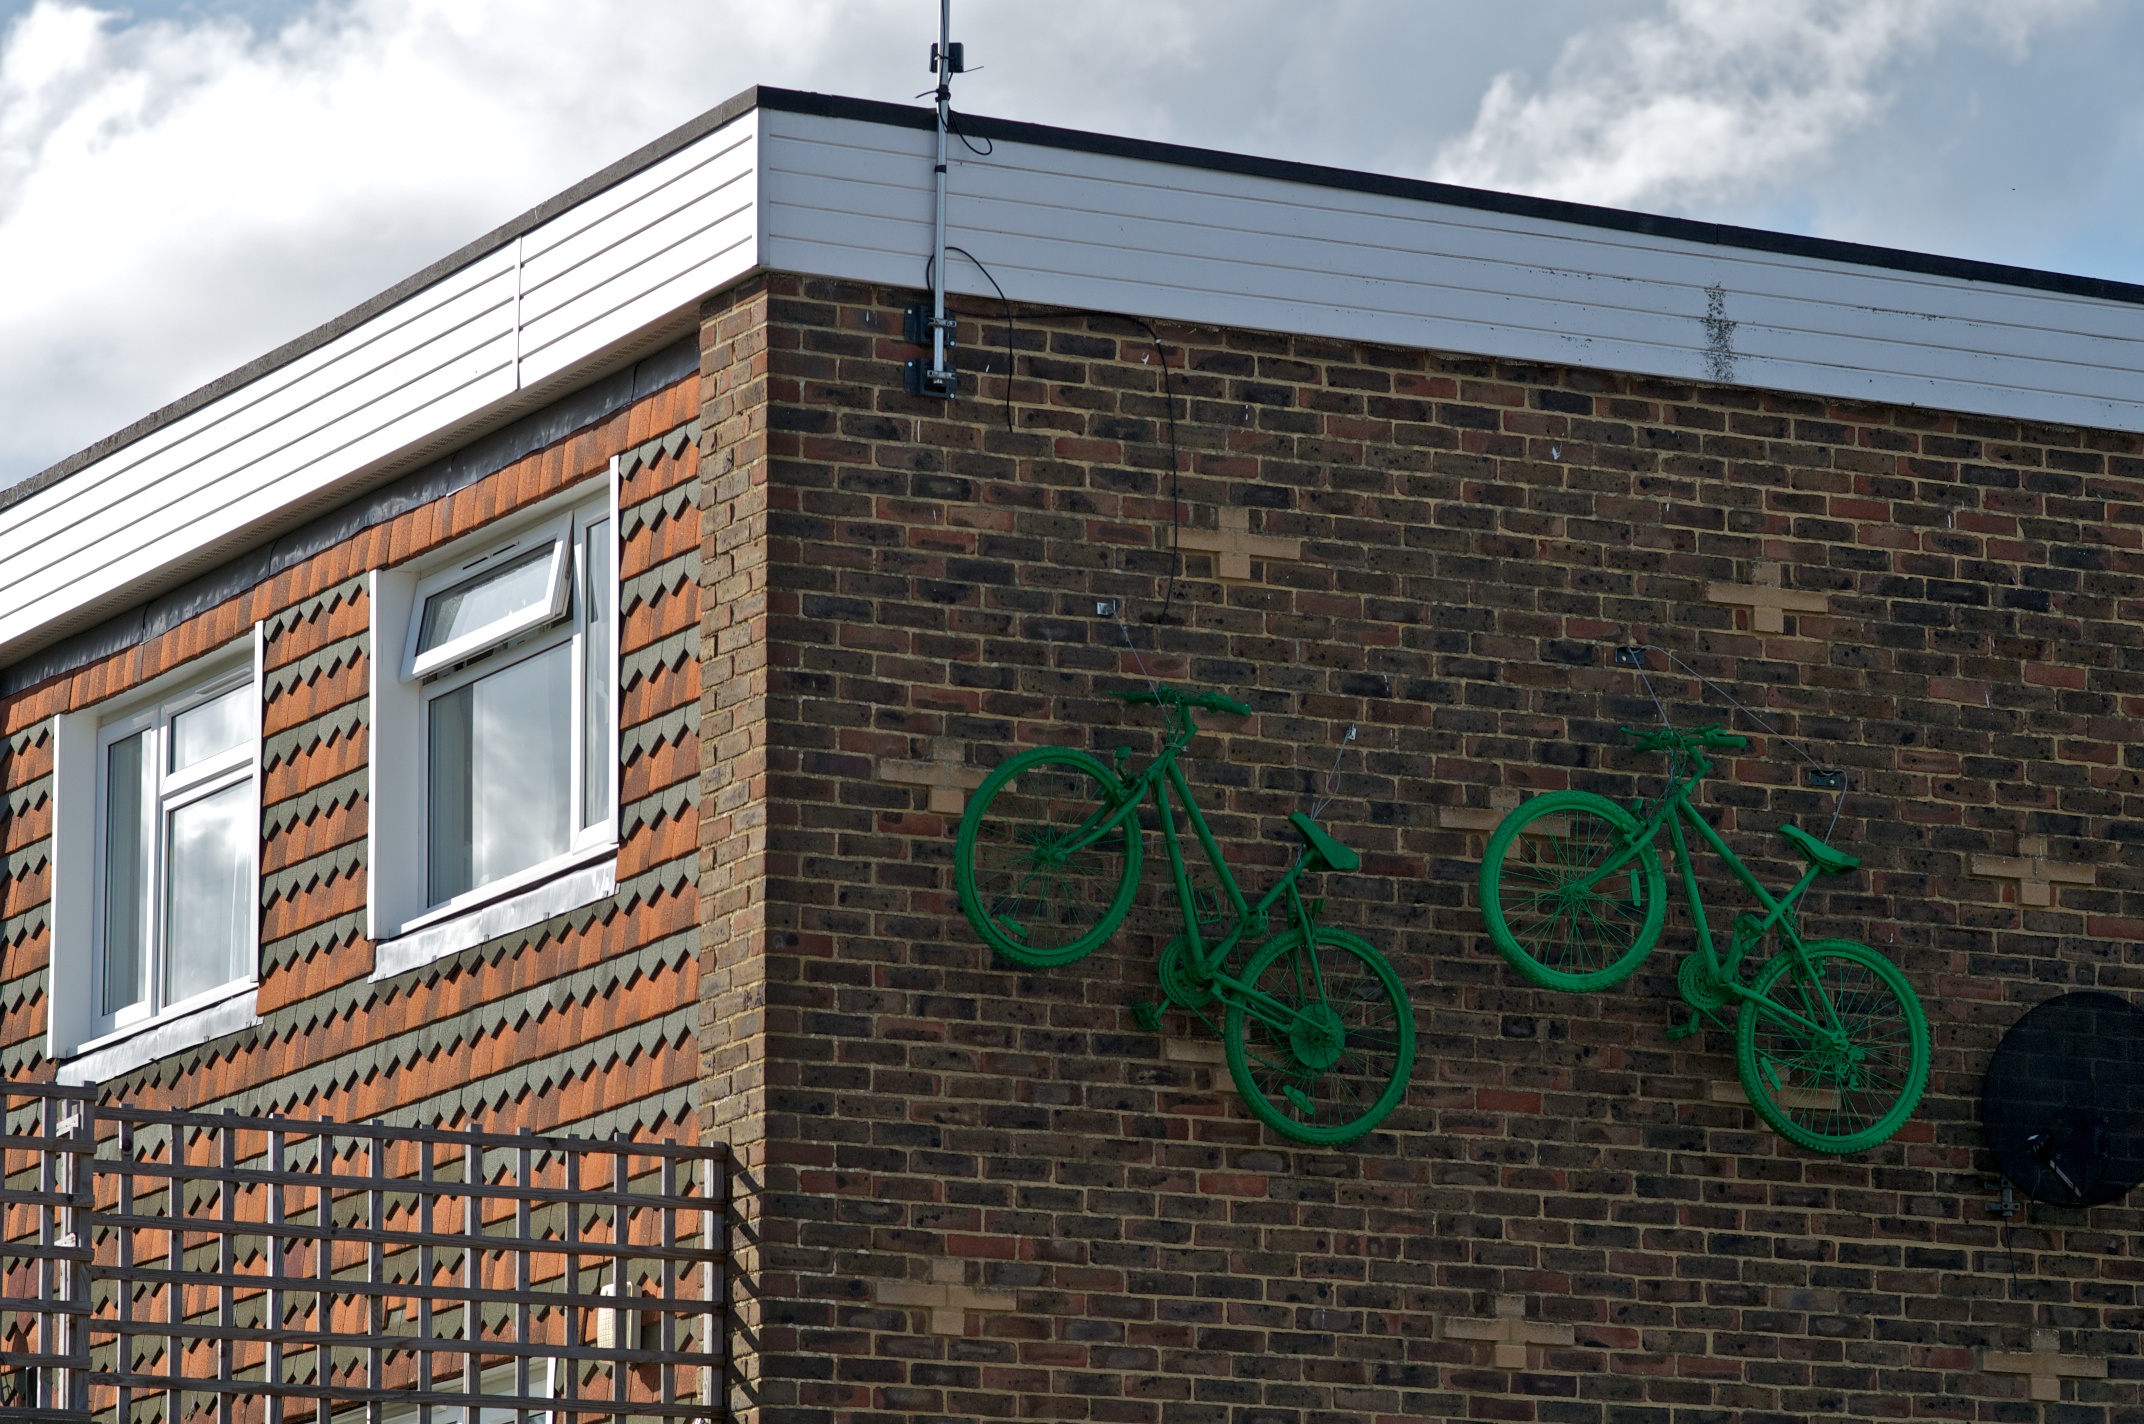 Two green bikes 'sit' at the top of a brick wall